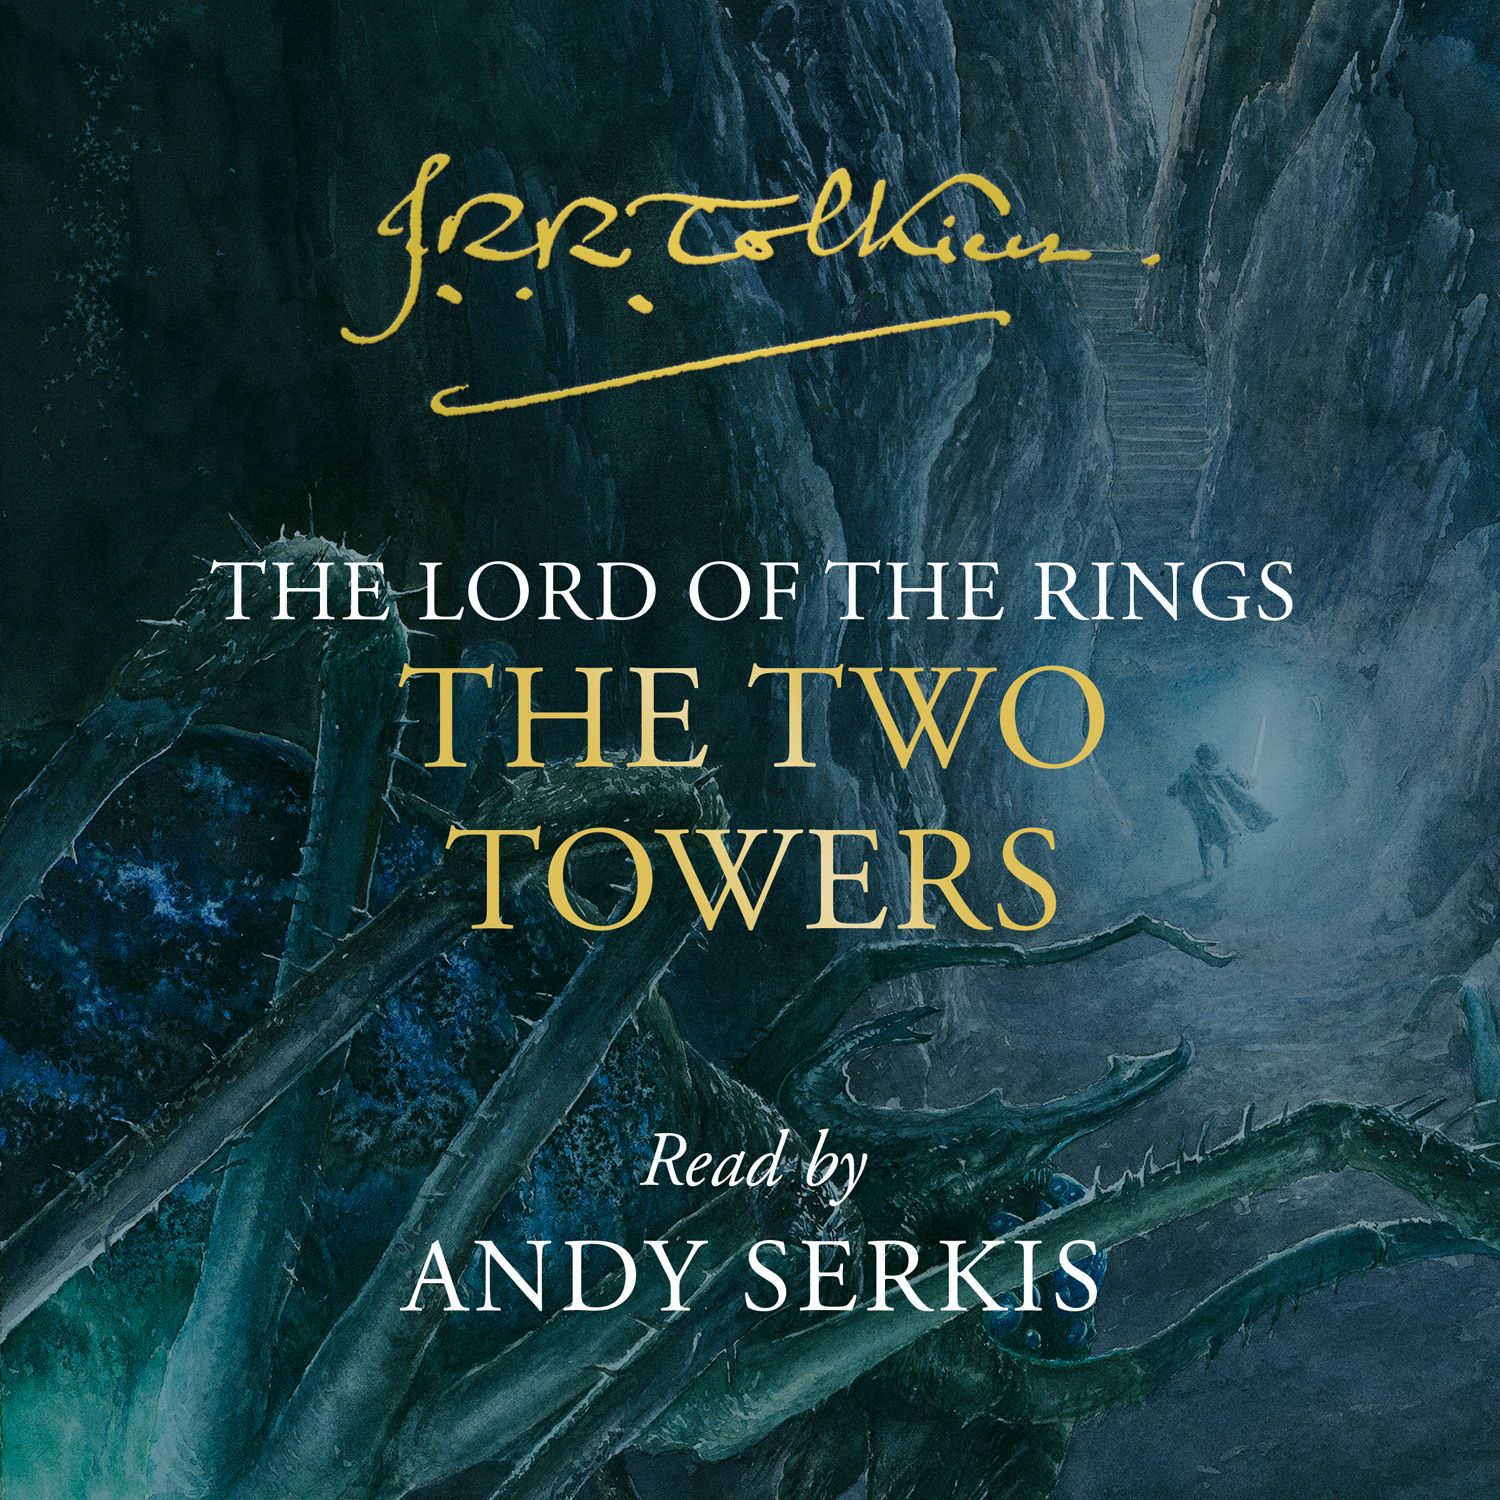 The Two Towers (Lord of the Rings Part 2) (TV Tie-In) by J. R. R. Tolkien,  Paperback